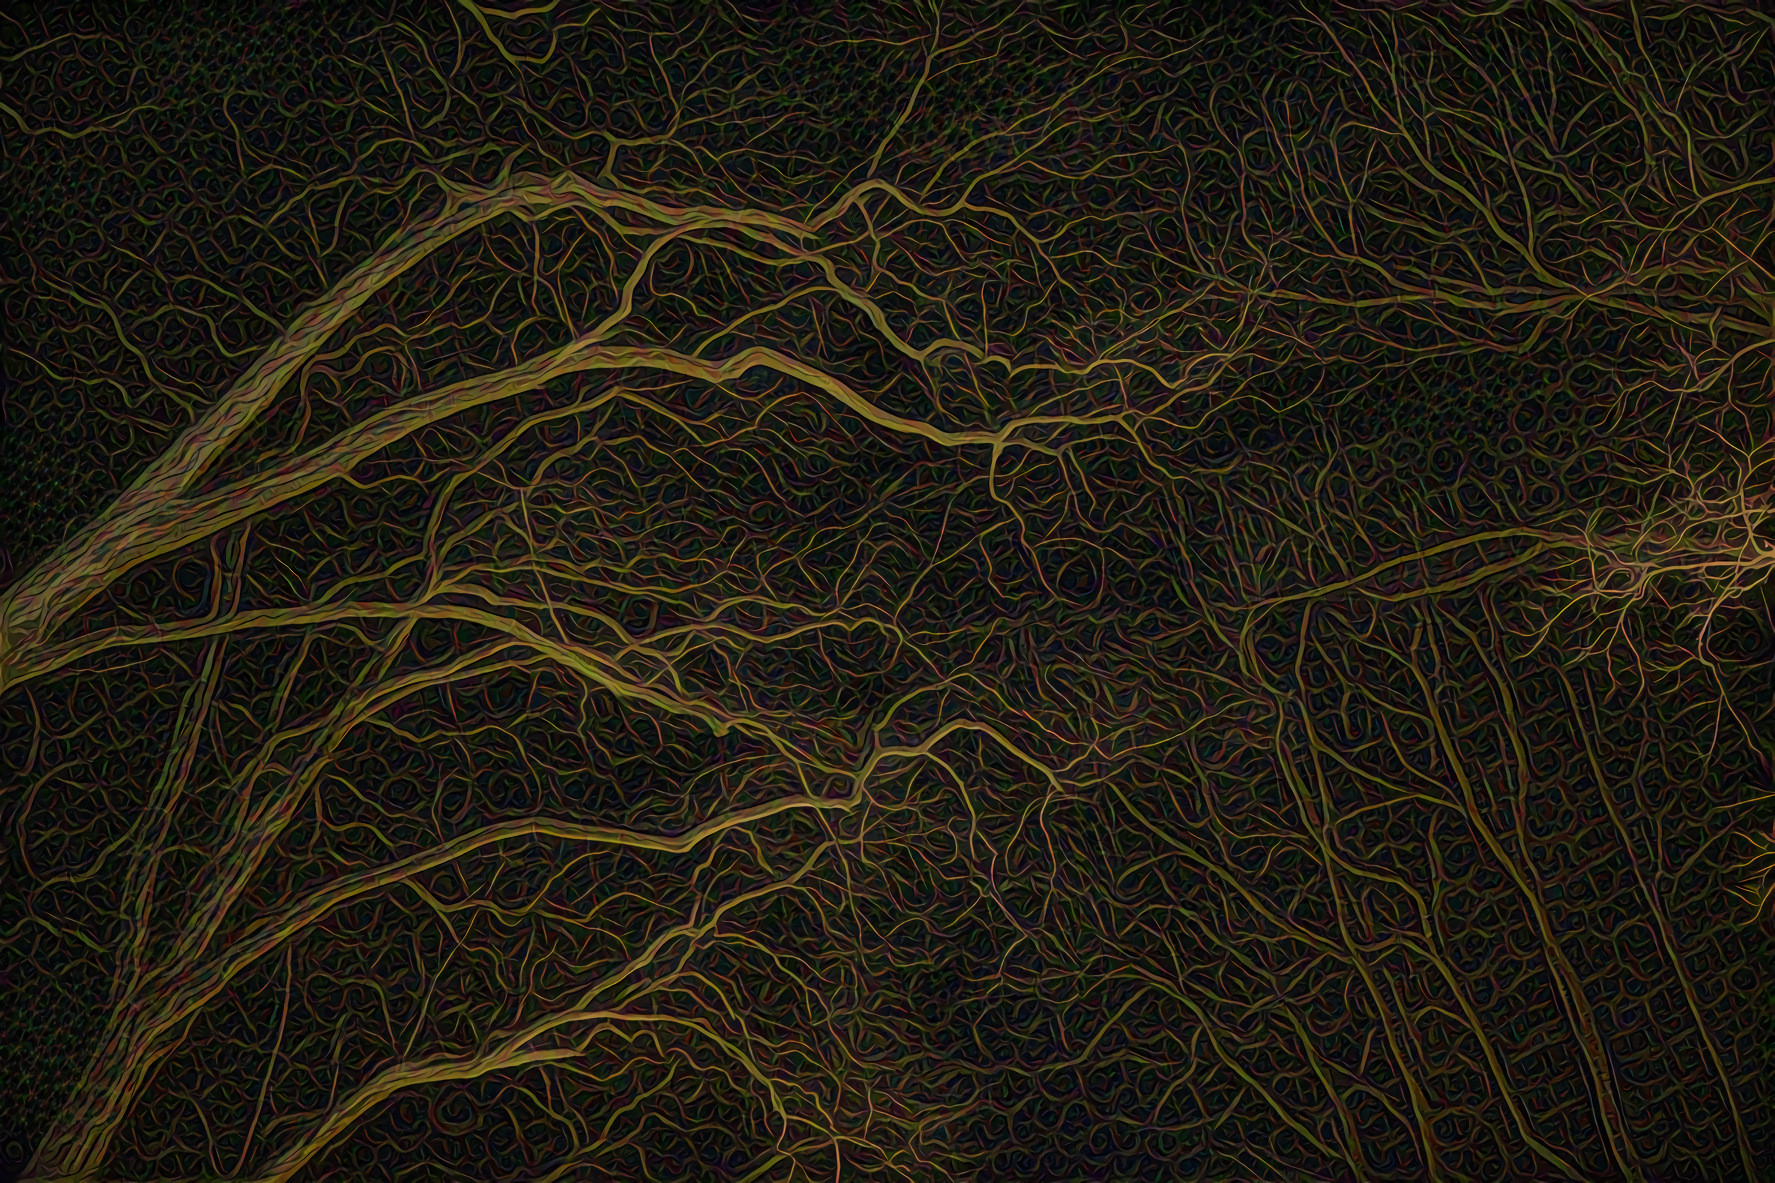 The Trees at Night